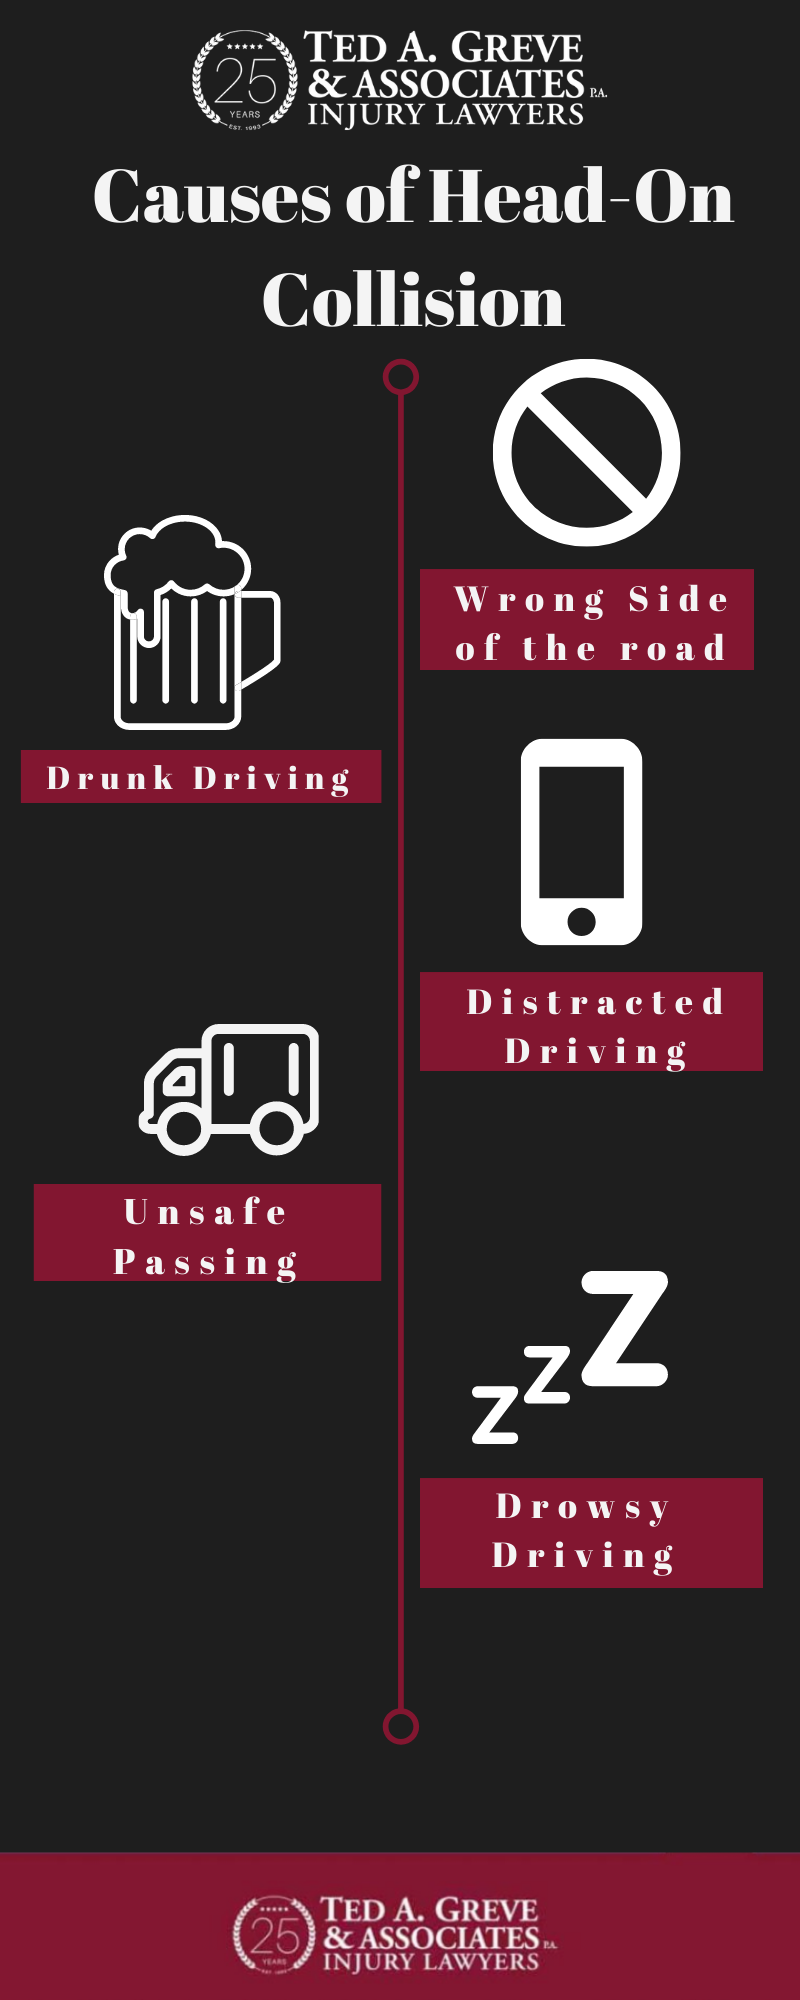 Ted Greve Atlanta Head On Car Accident Infographic